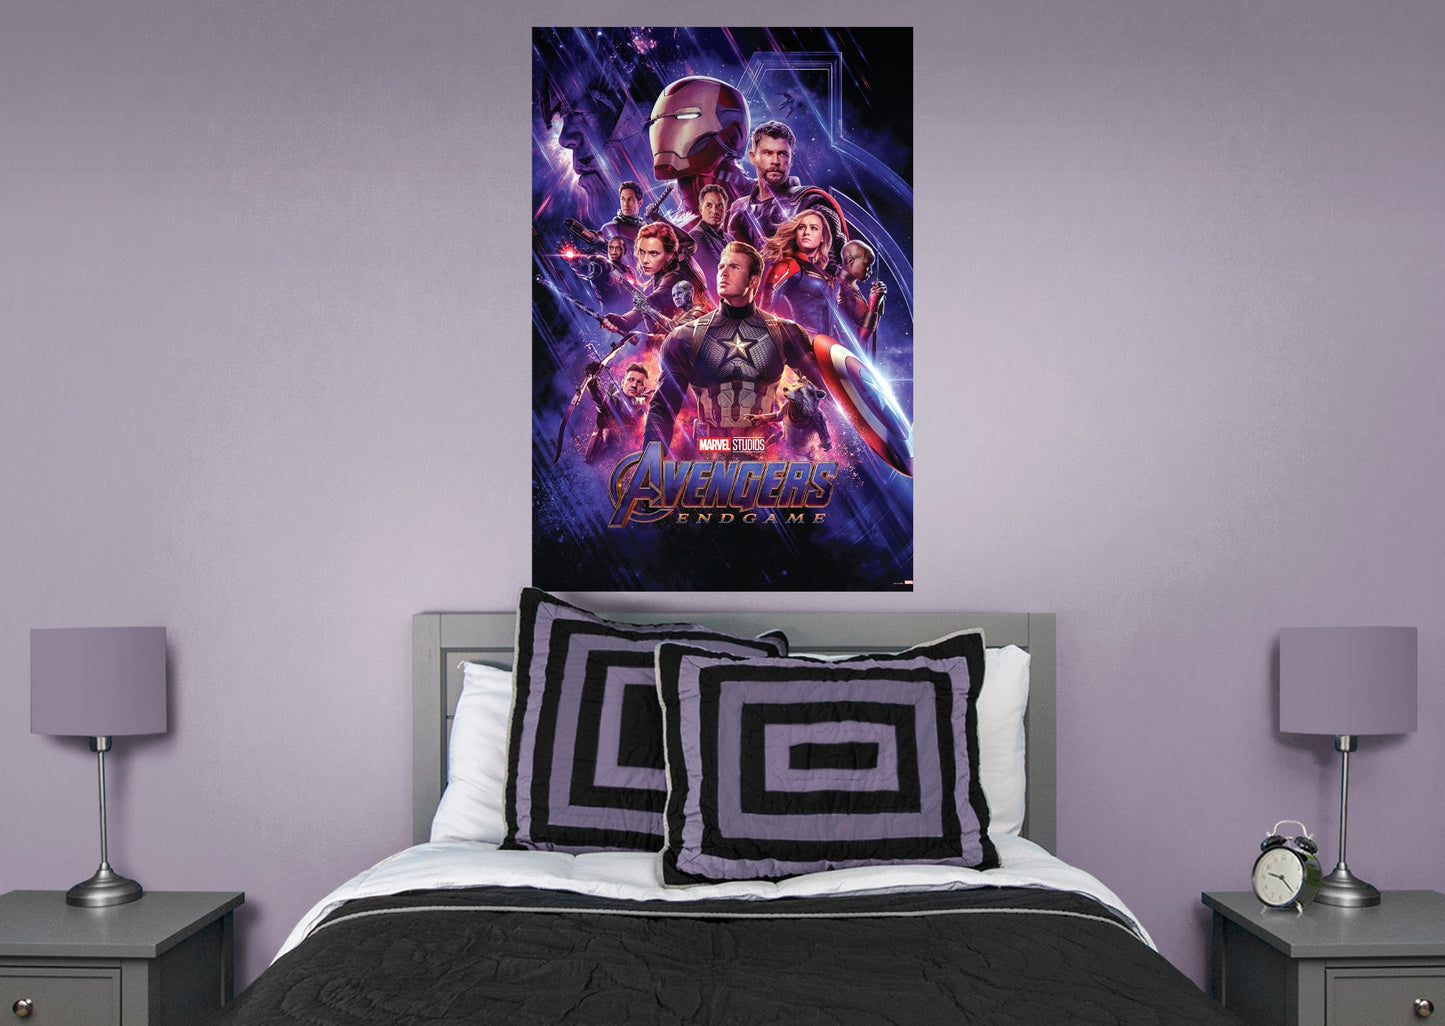 Avengers: Endgame Movie Posters Mural        - Officially Licensed Marvel Removable Wall   Adhesive Decal